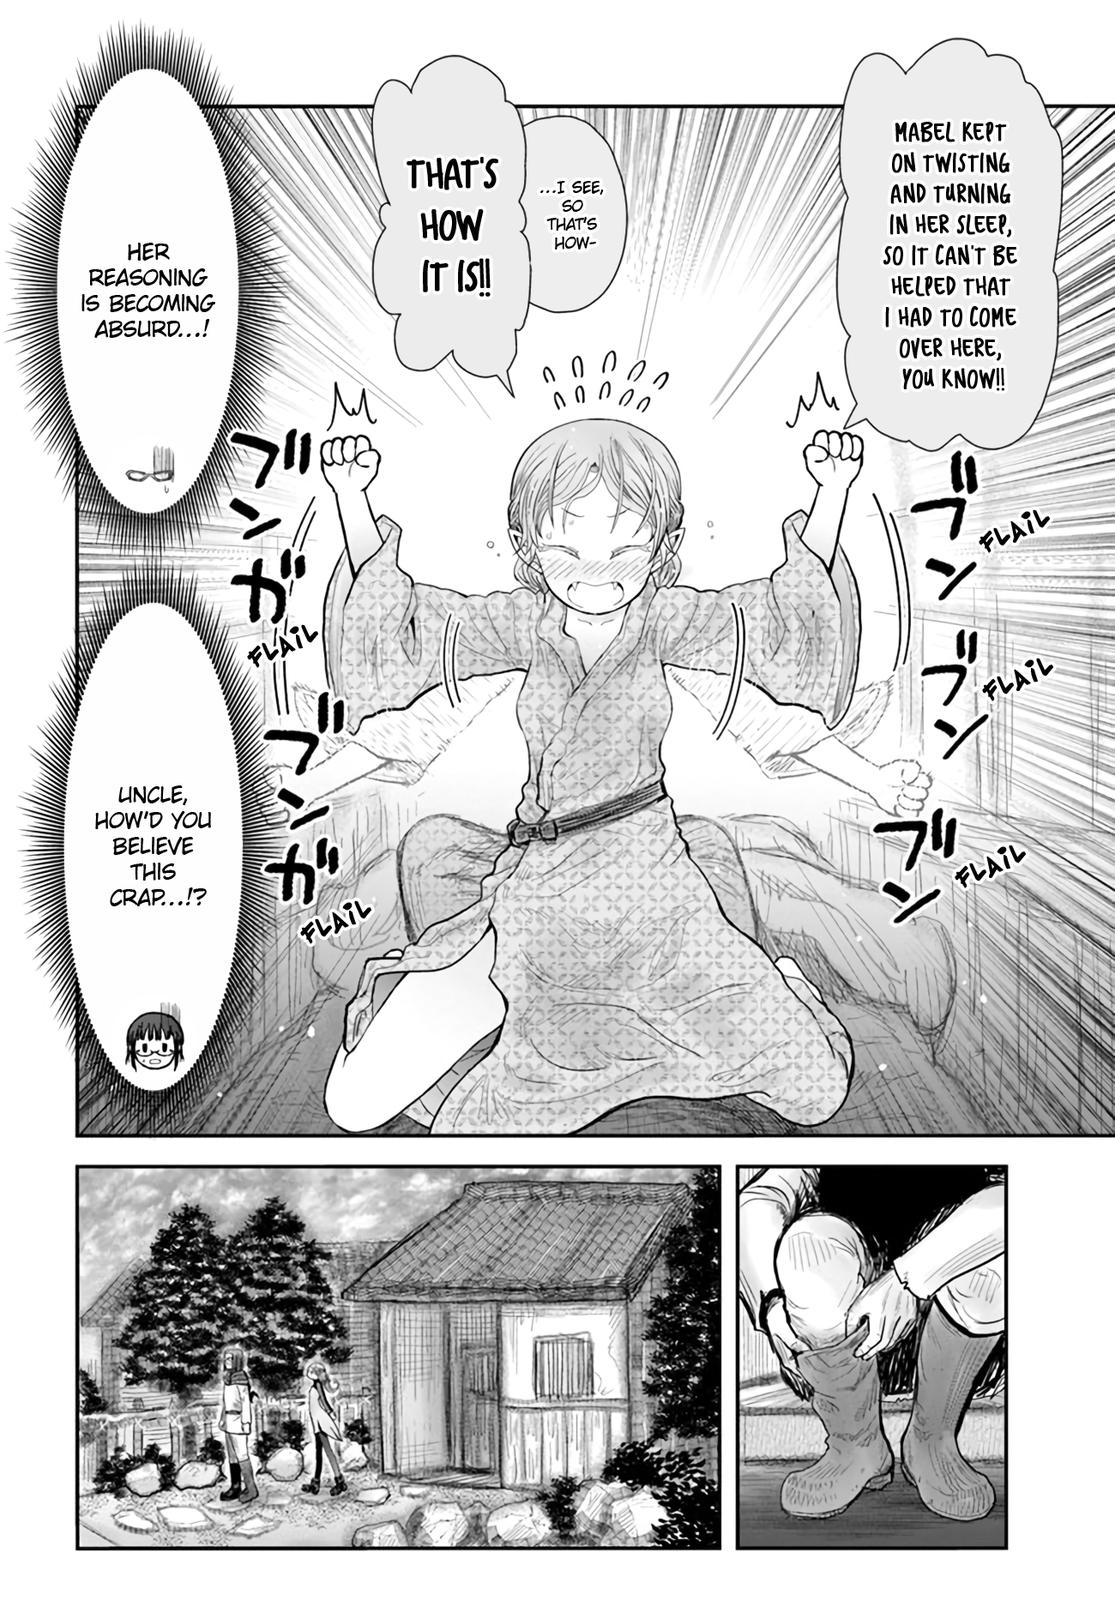 Uncle from Another World, Chapter 40 - Uncle from Another World Manga Online